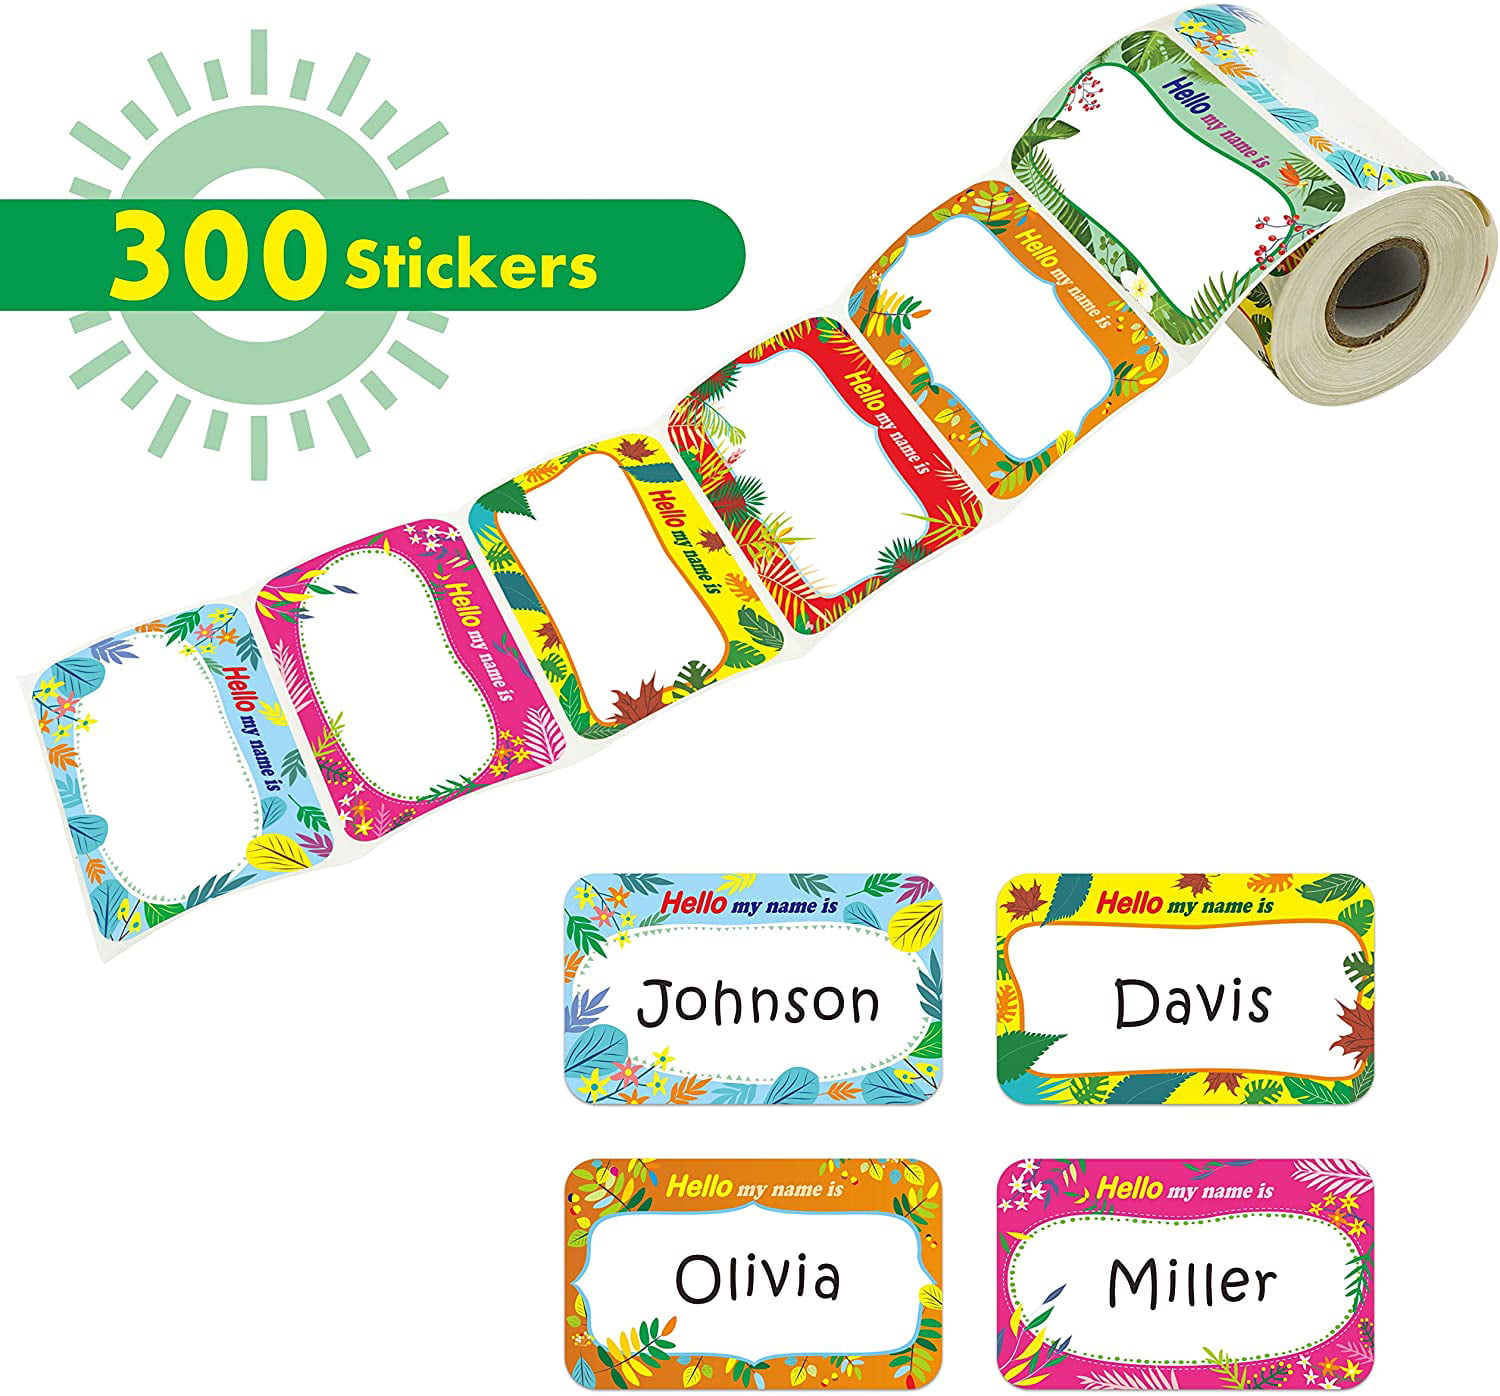 3.5x2.2 Each 300 Pcs Name Tag Label Sticker Galaxy-Themed in 6 Designs with Perforated Line for School Office Home